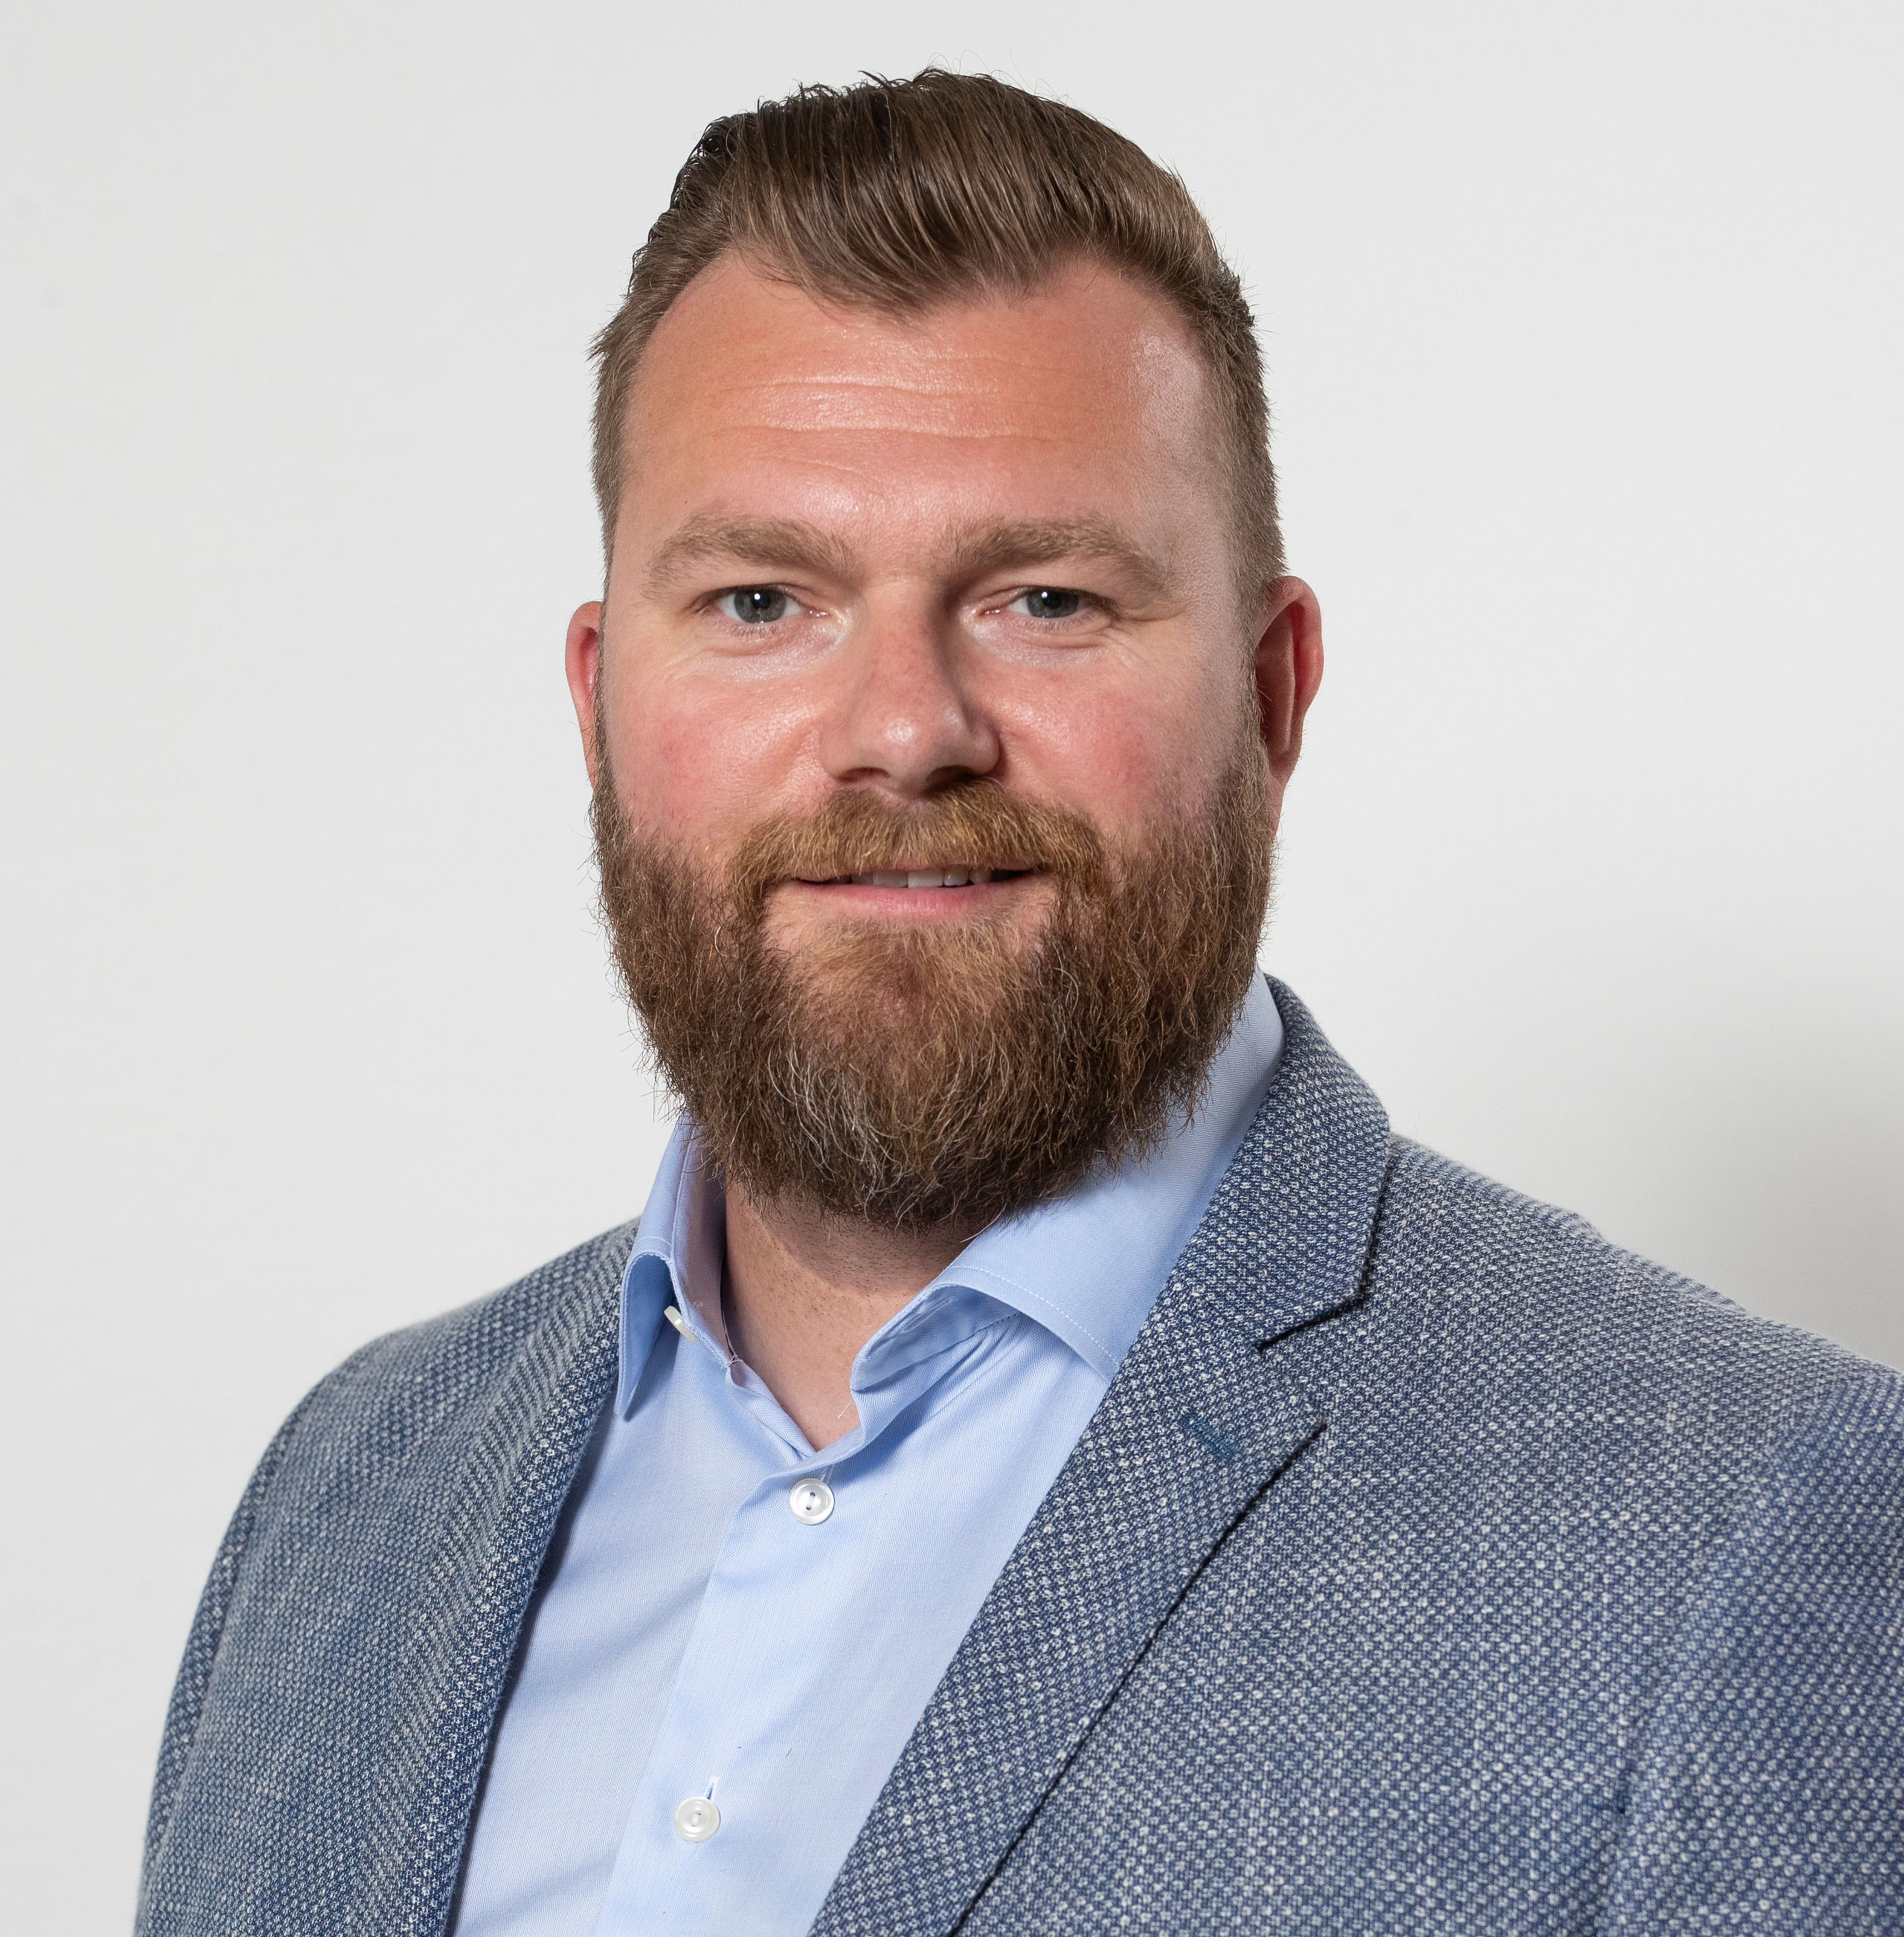 TRESU appoints Thomas Ellegaard Mohr Vice President of its Solutions Division